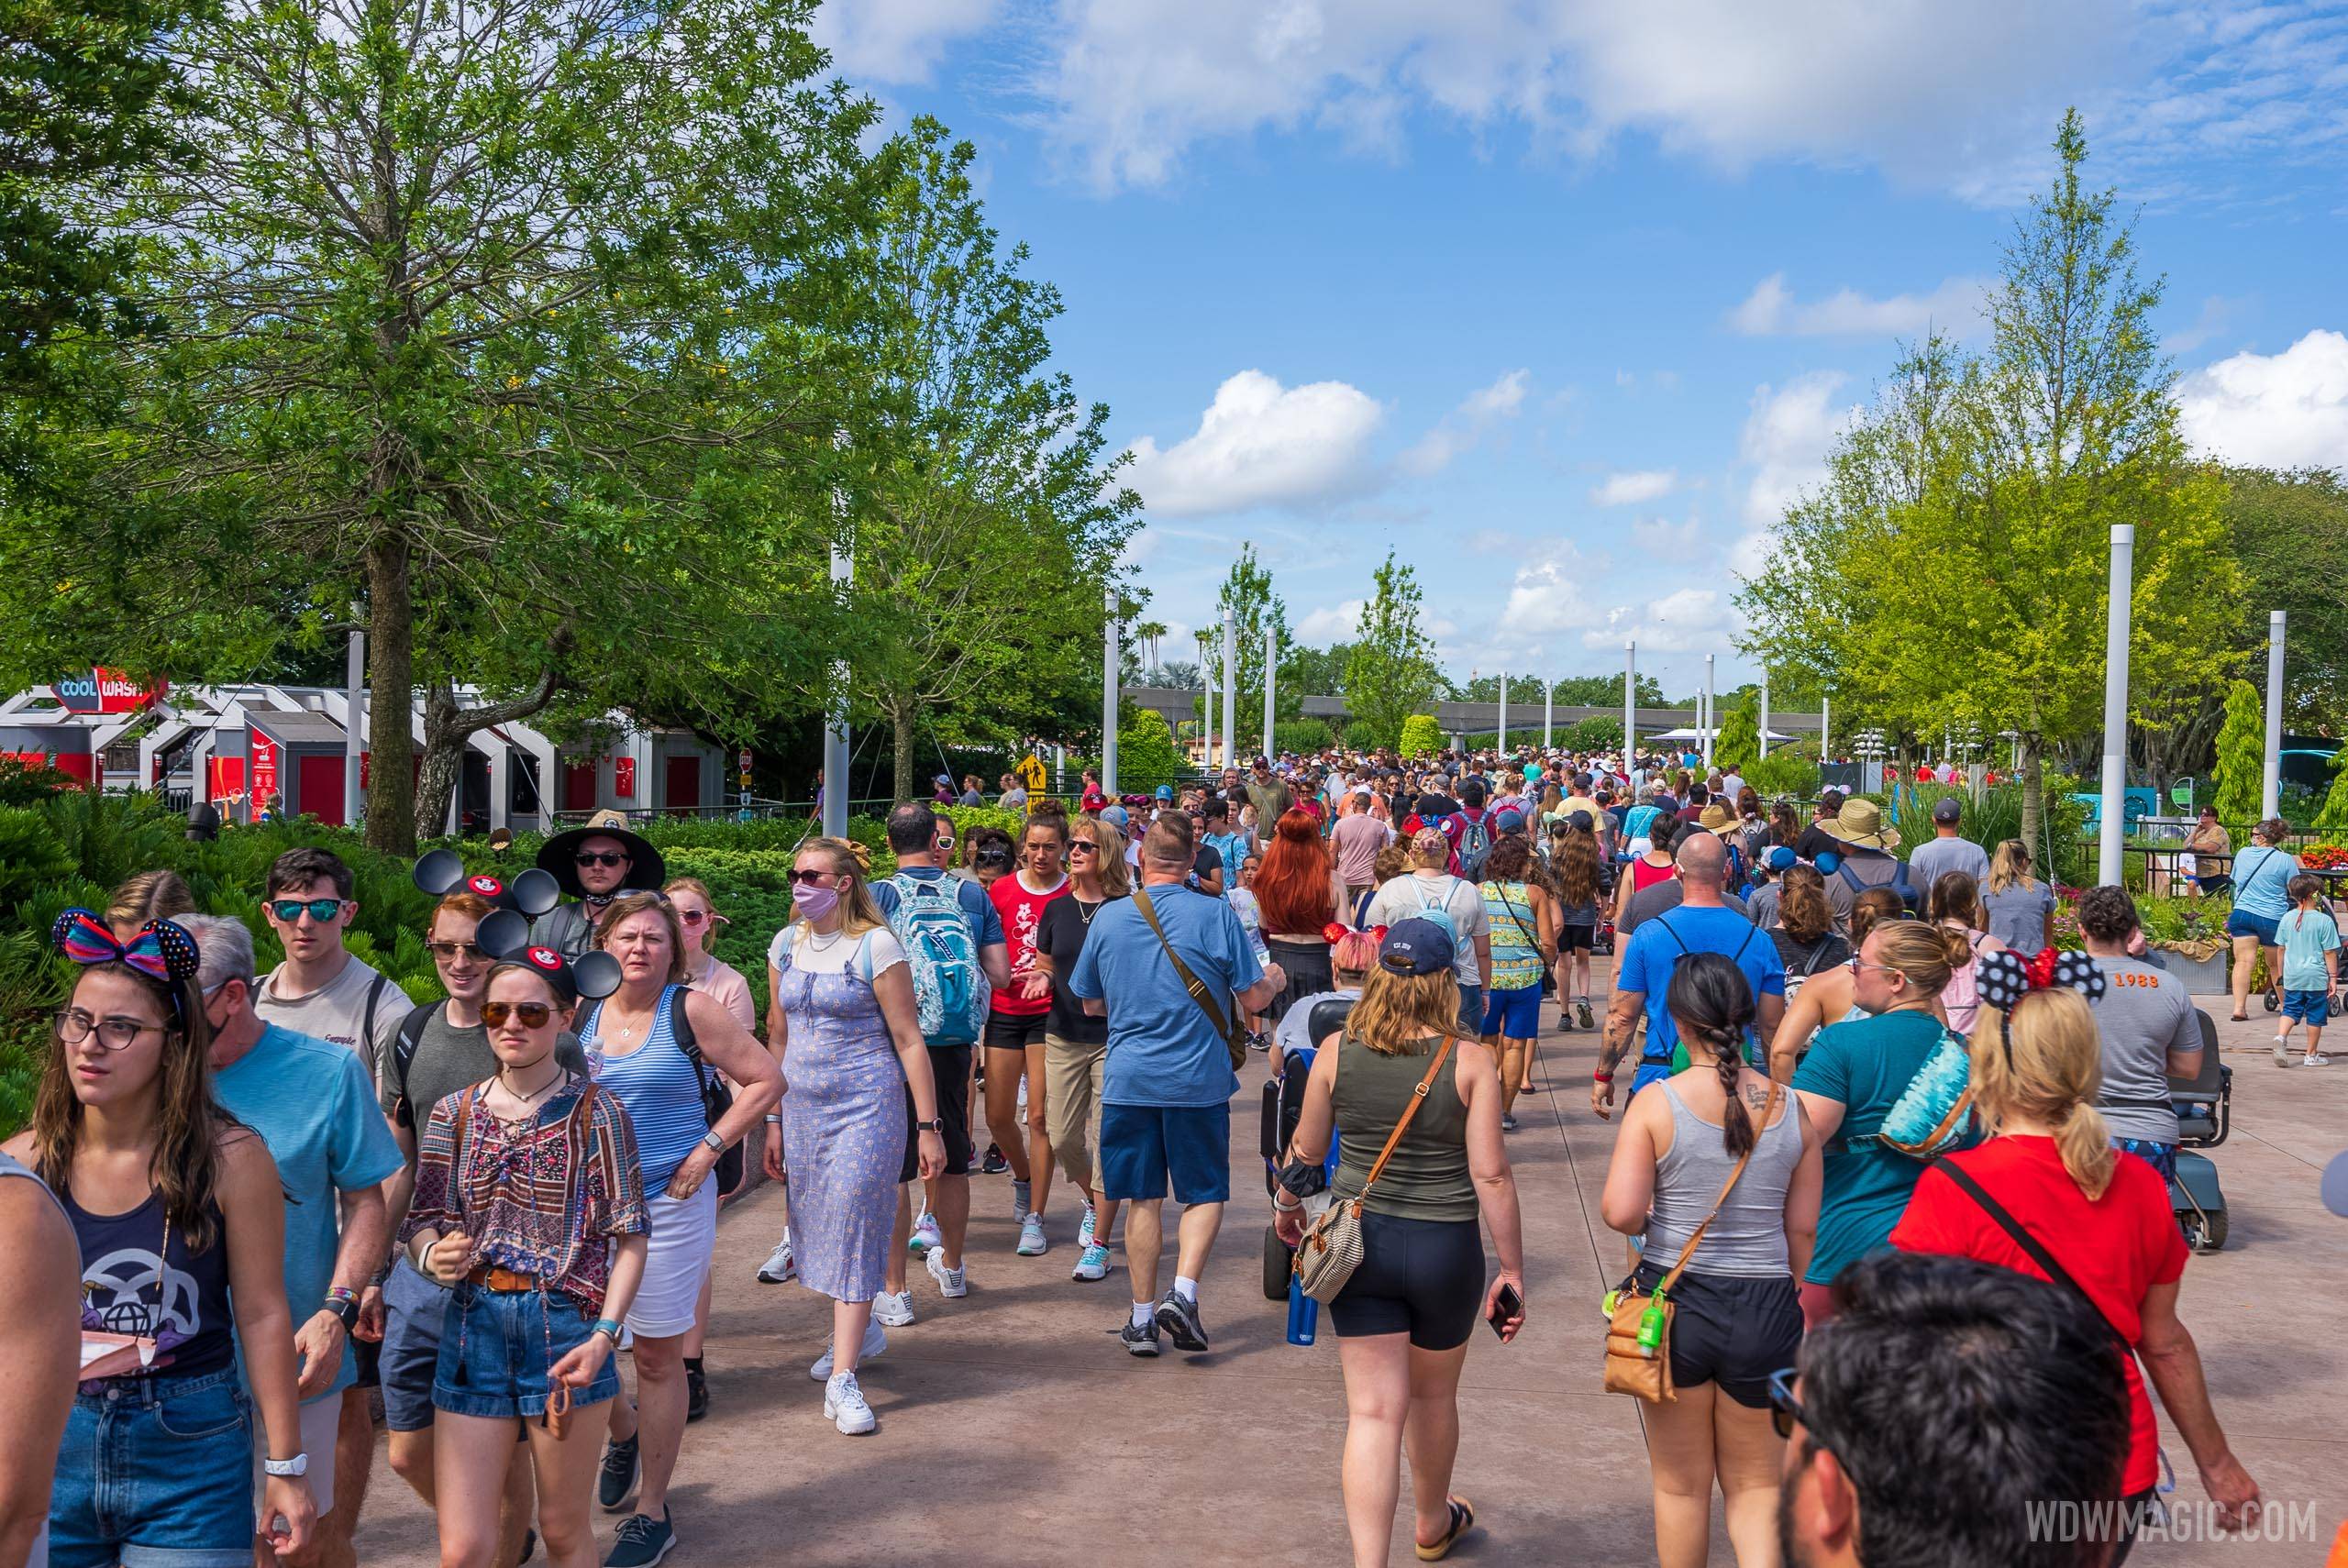 Guests heading for Test Track at rope drop